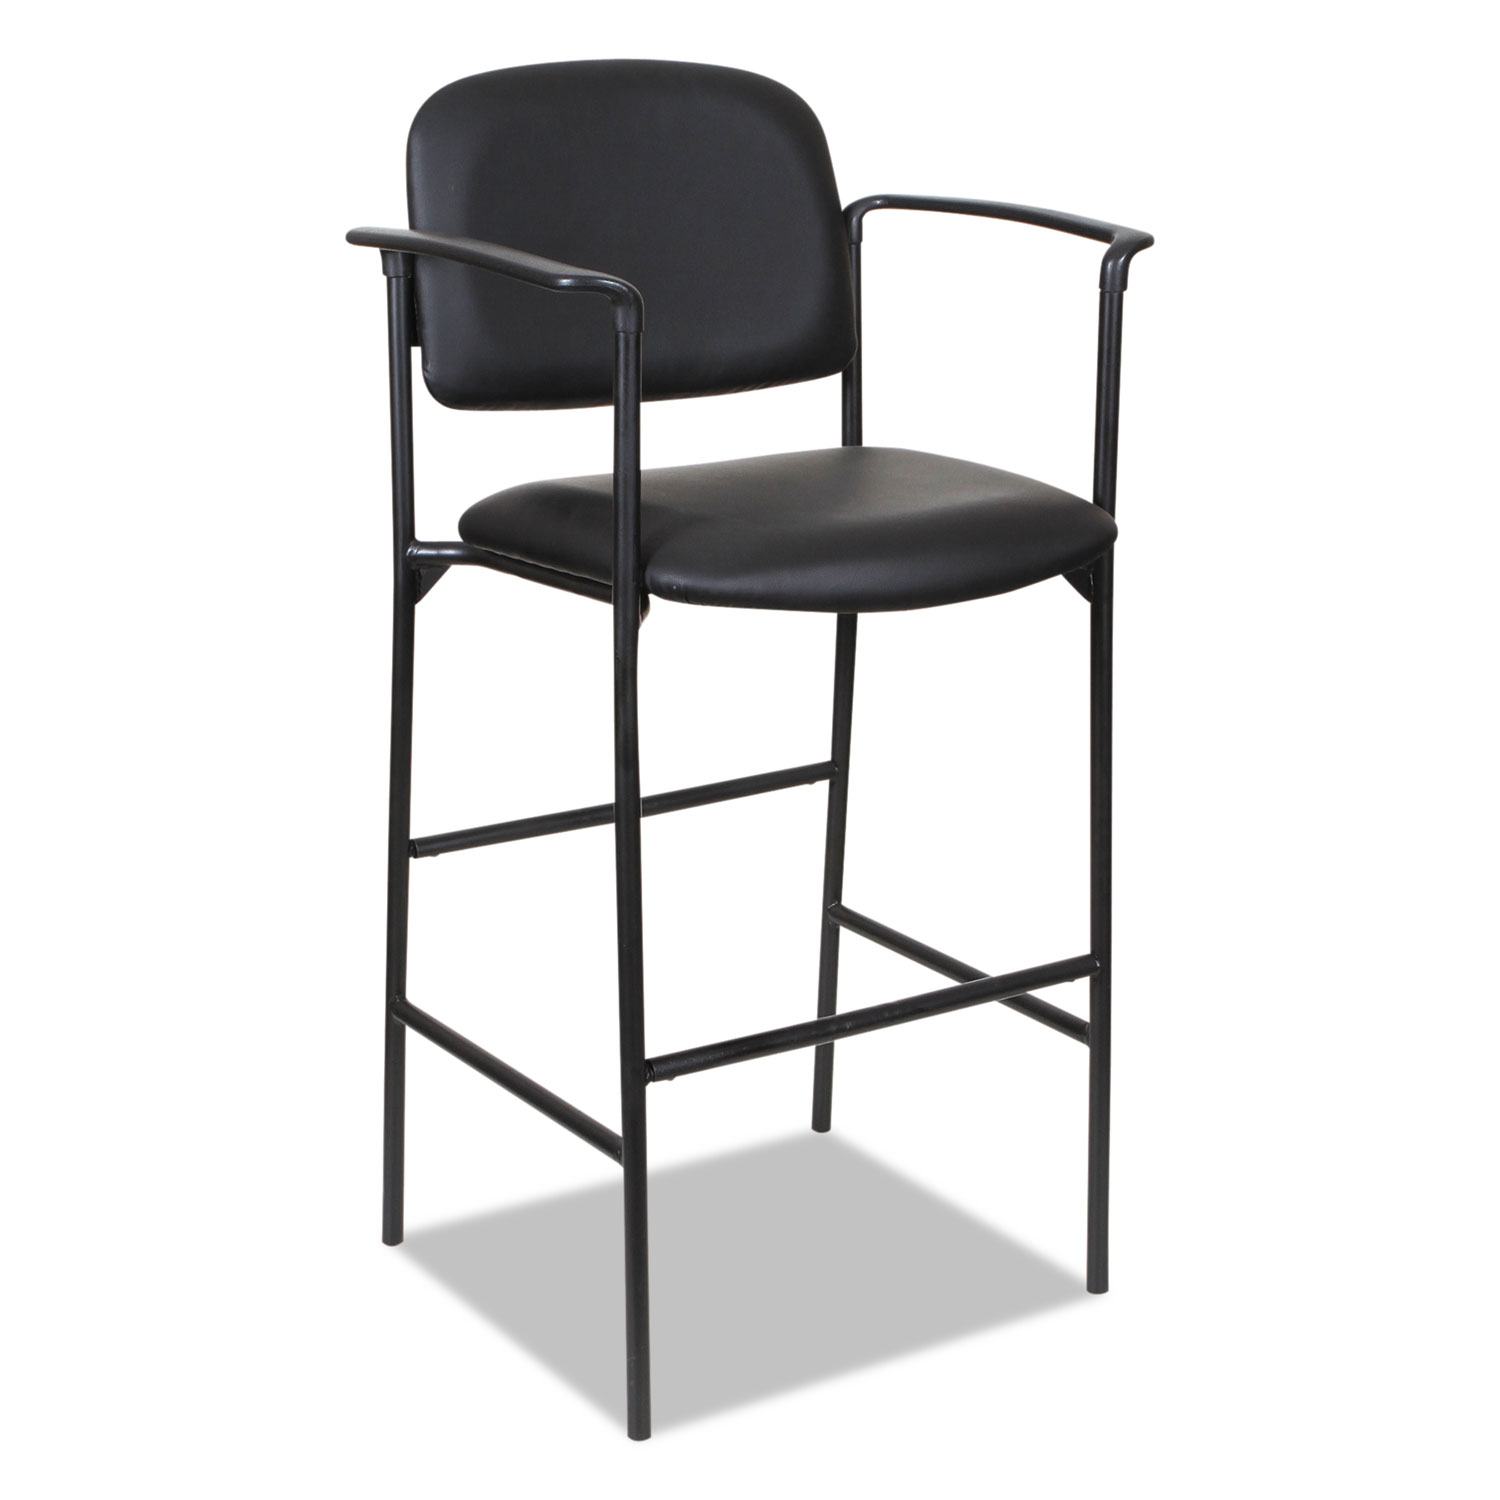 Sorrento Series Stool, Black, Faux Leather, with Arms, 2 per carton